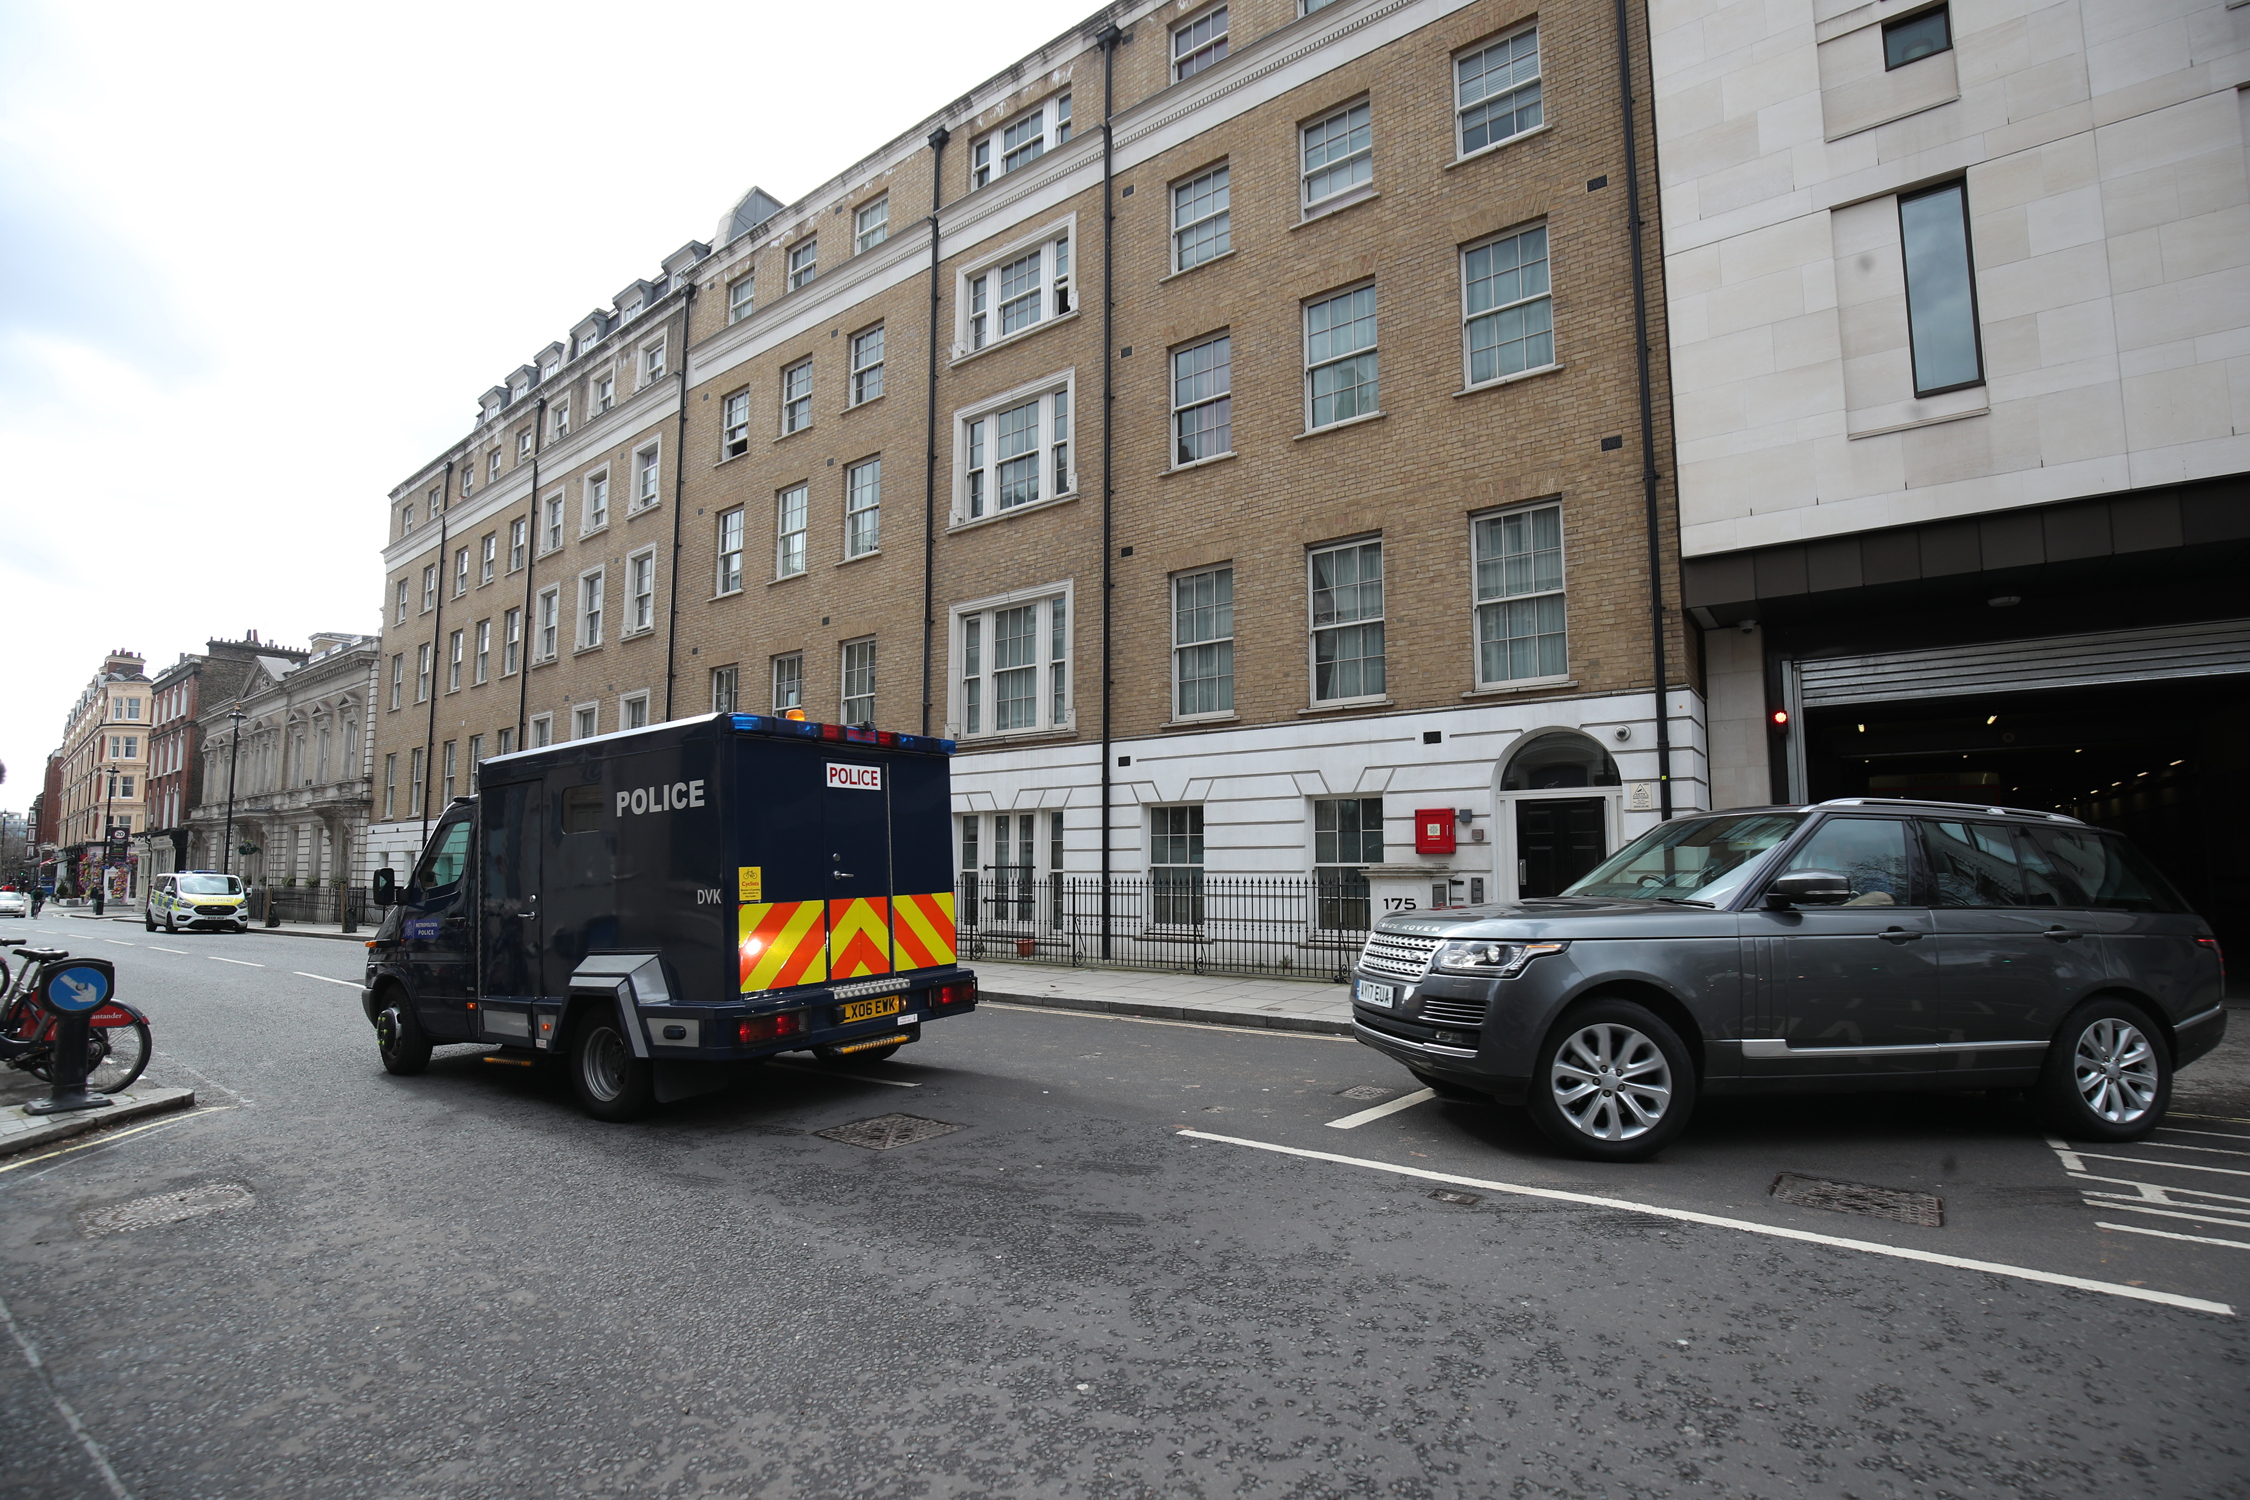 A police van leaves Westminster Magistrates Court, in London, where serving police constable Wayne Couzens appeared charged with murder and kidnapping related to the death of Sarah Everard. Picture date: Saturday March 13, 2021.